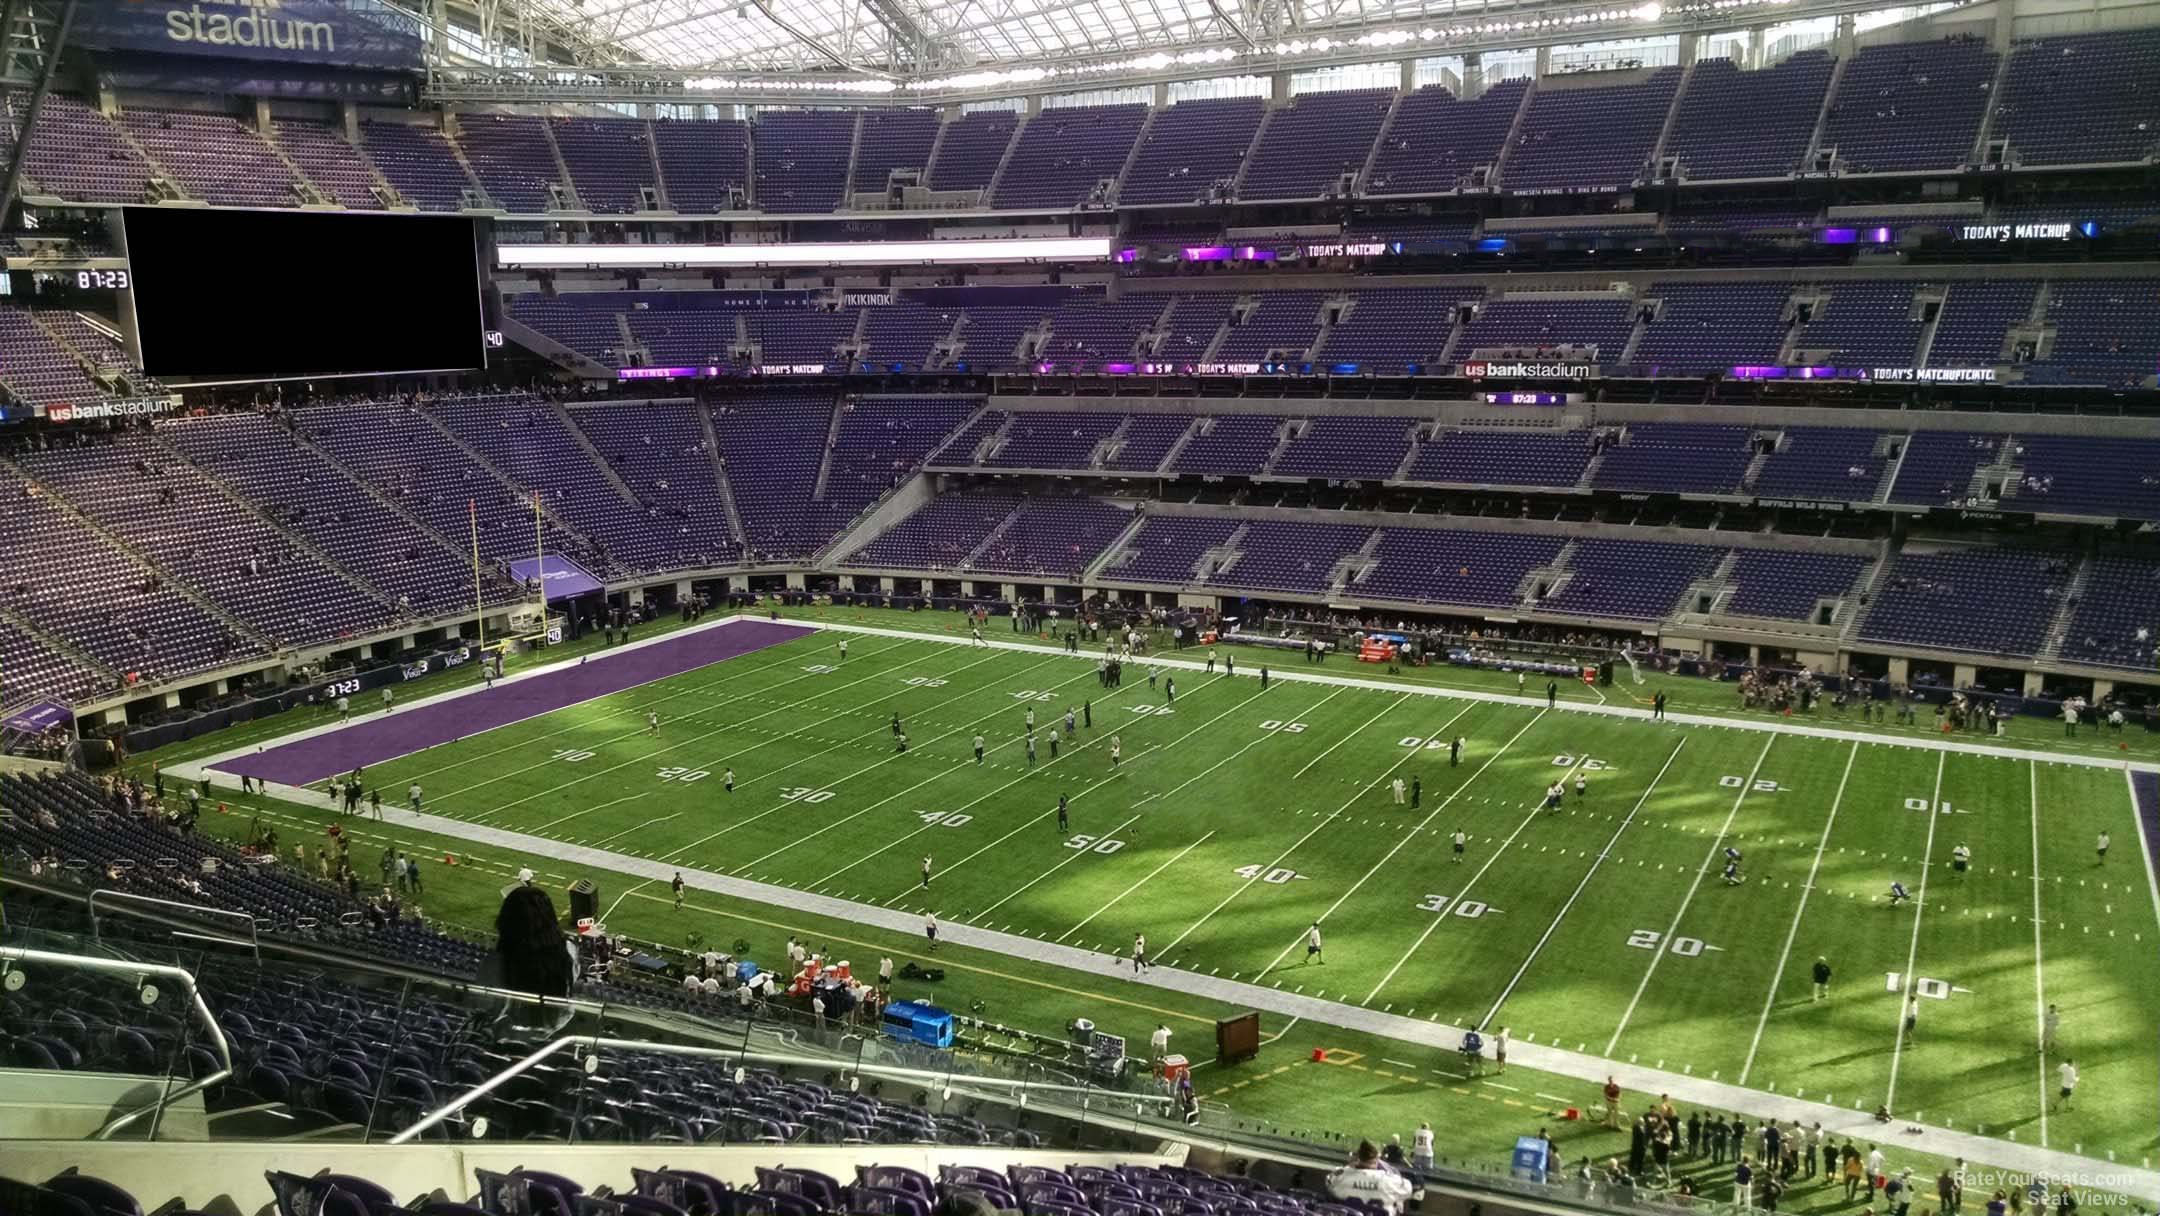 section 208, row 15 seat view  for football - u.s. bank stadium